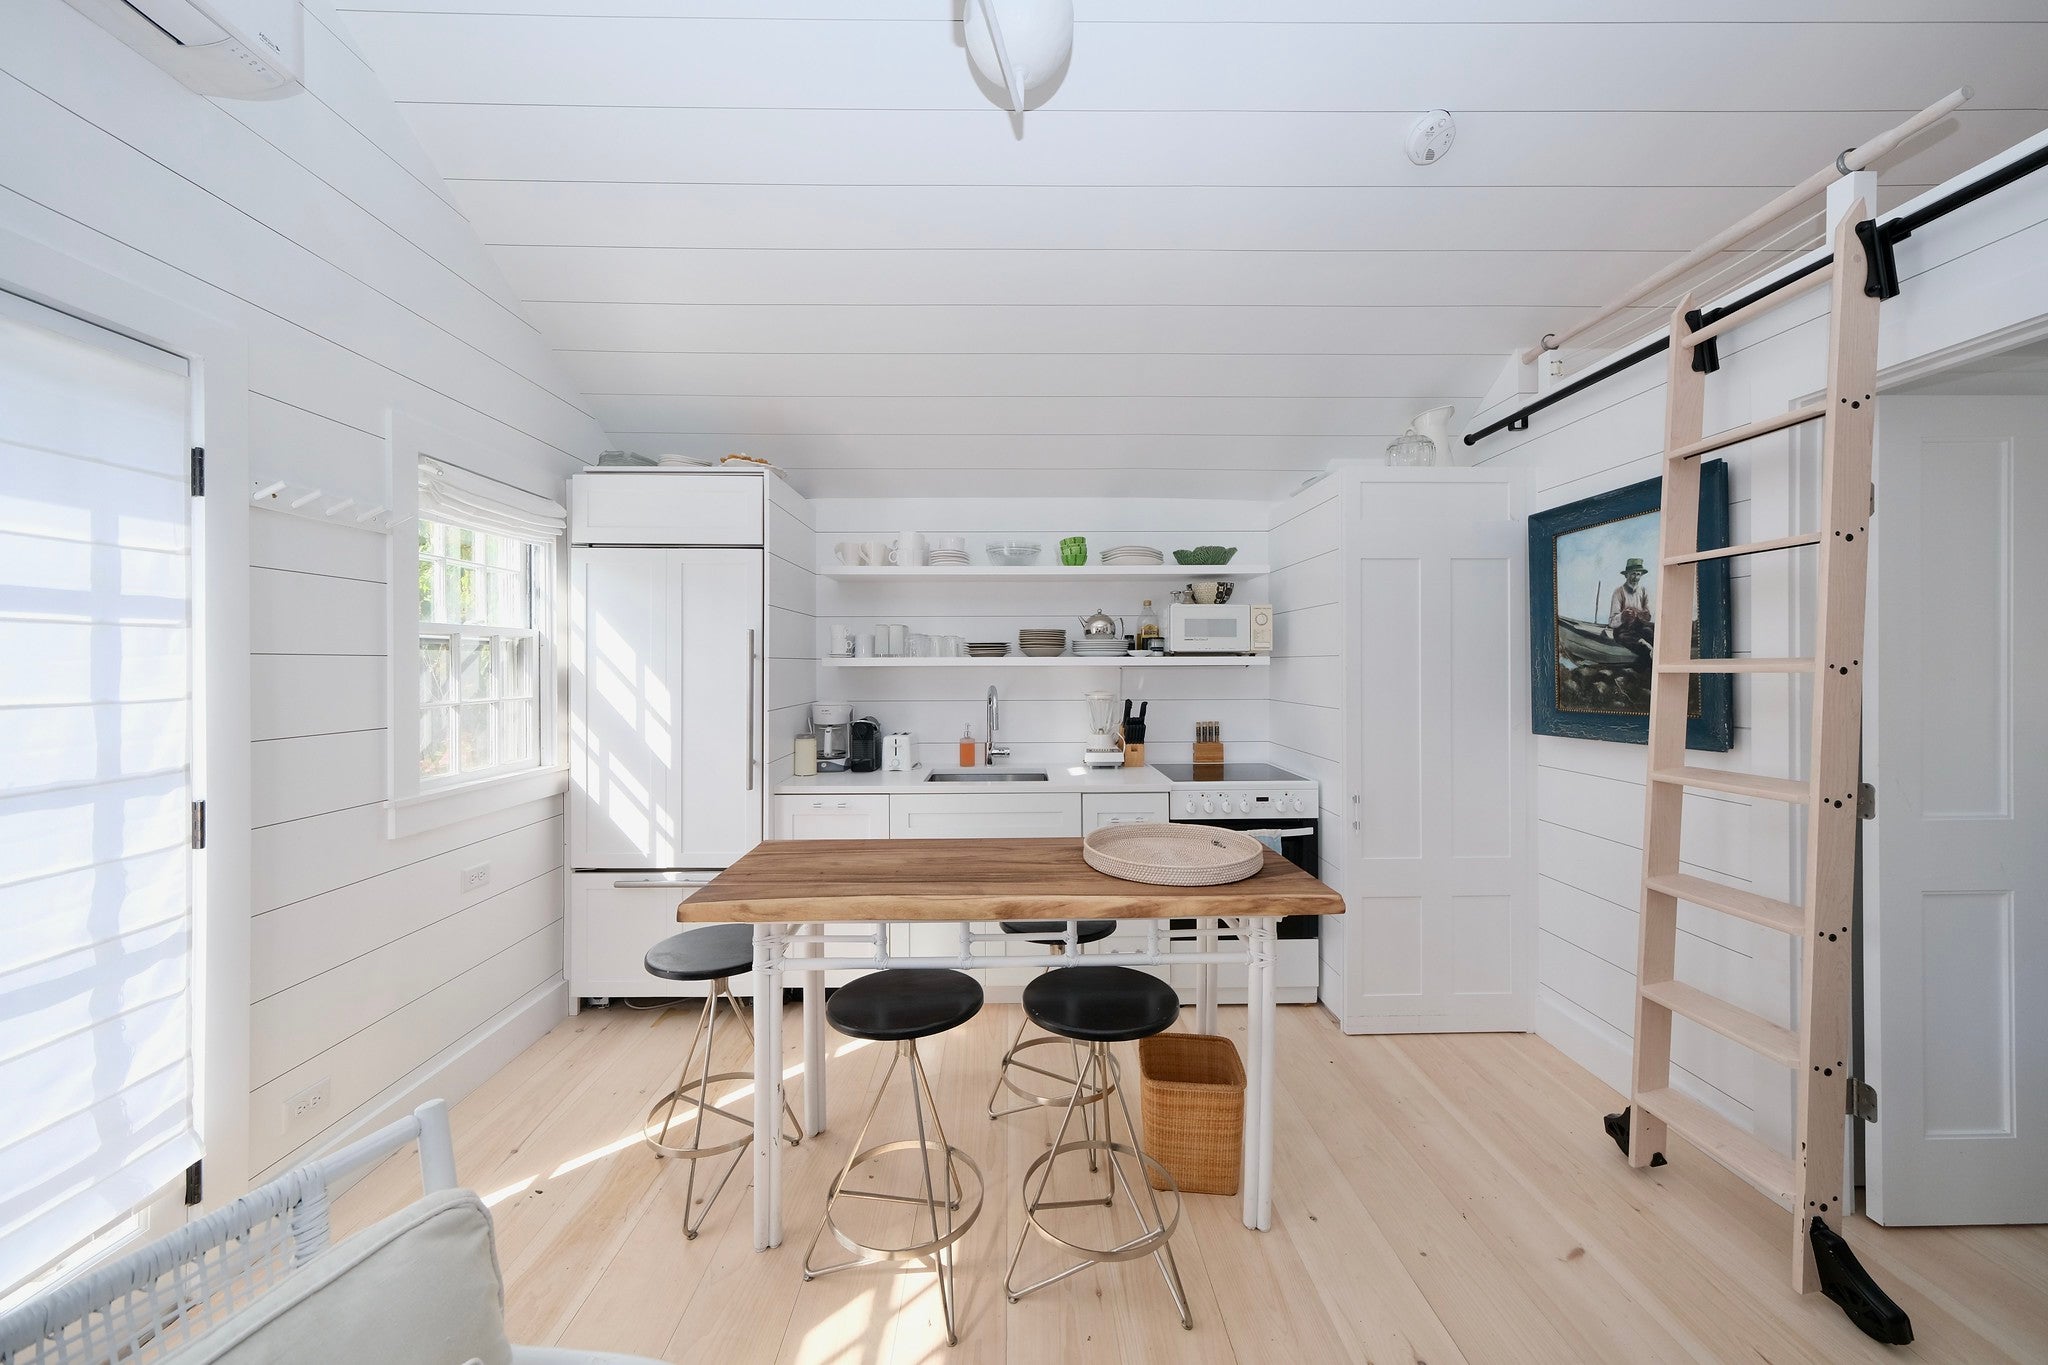 White shiplap walls, a long table with stools, white metal furniture, and white appliances.